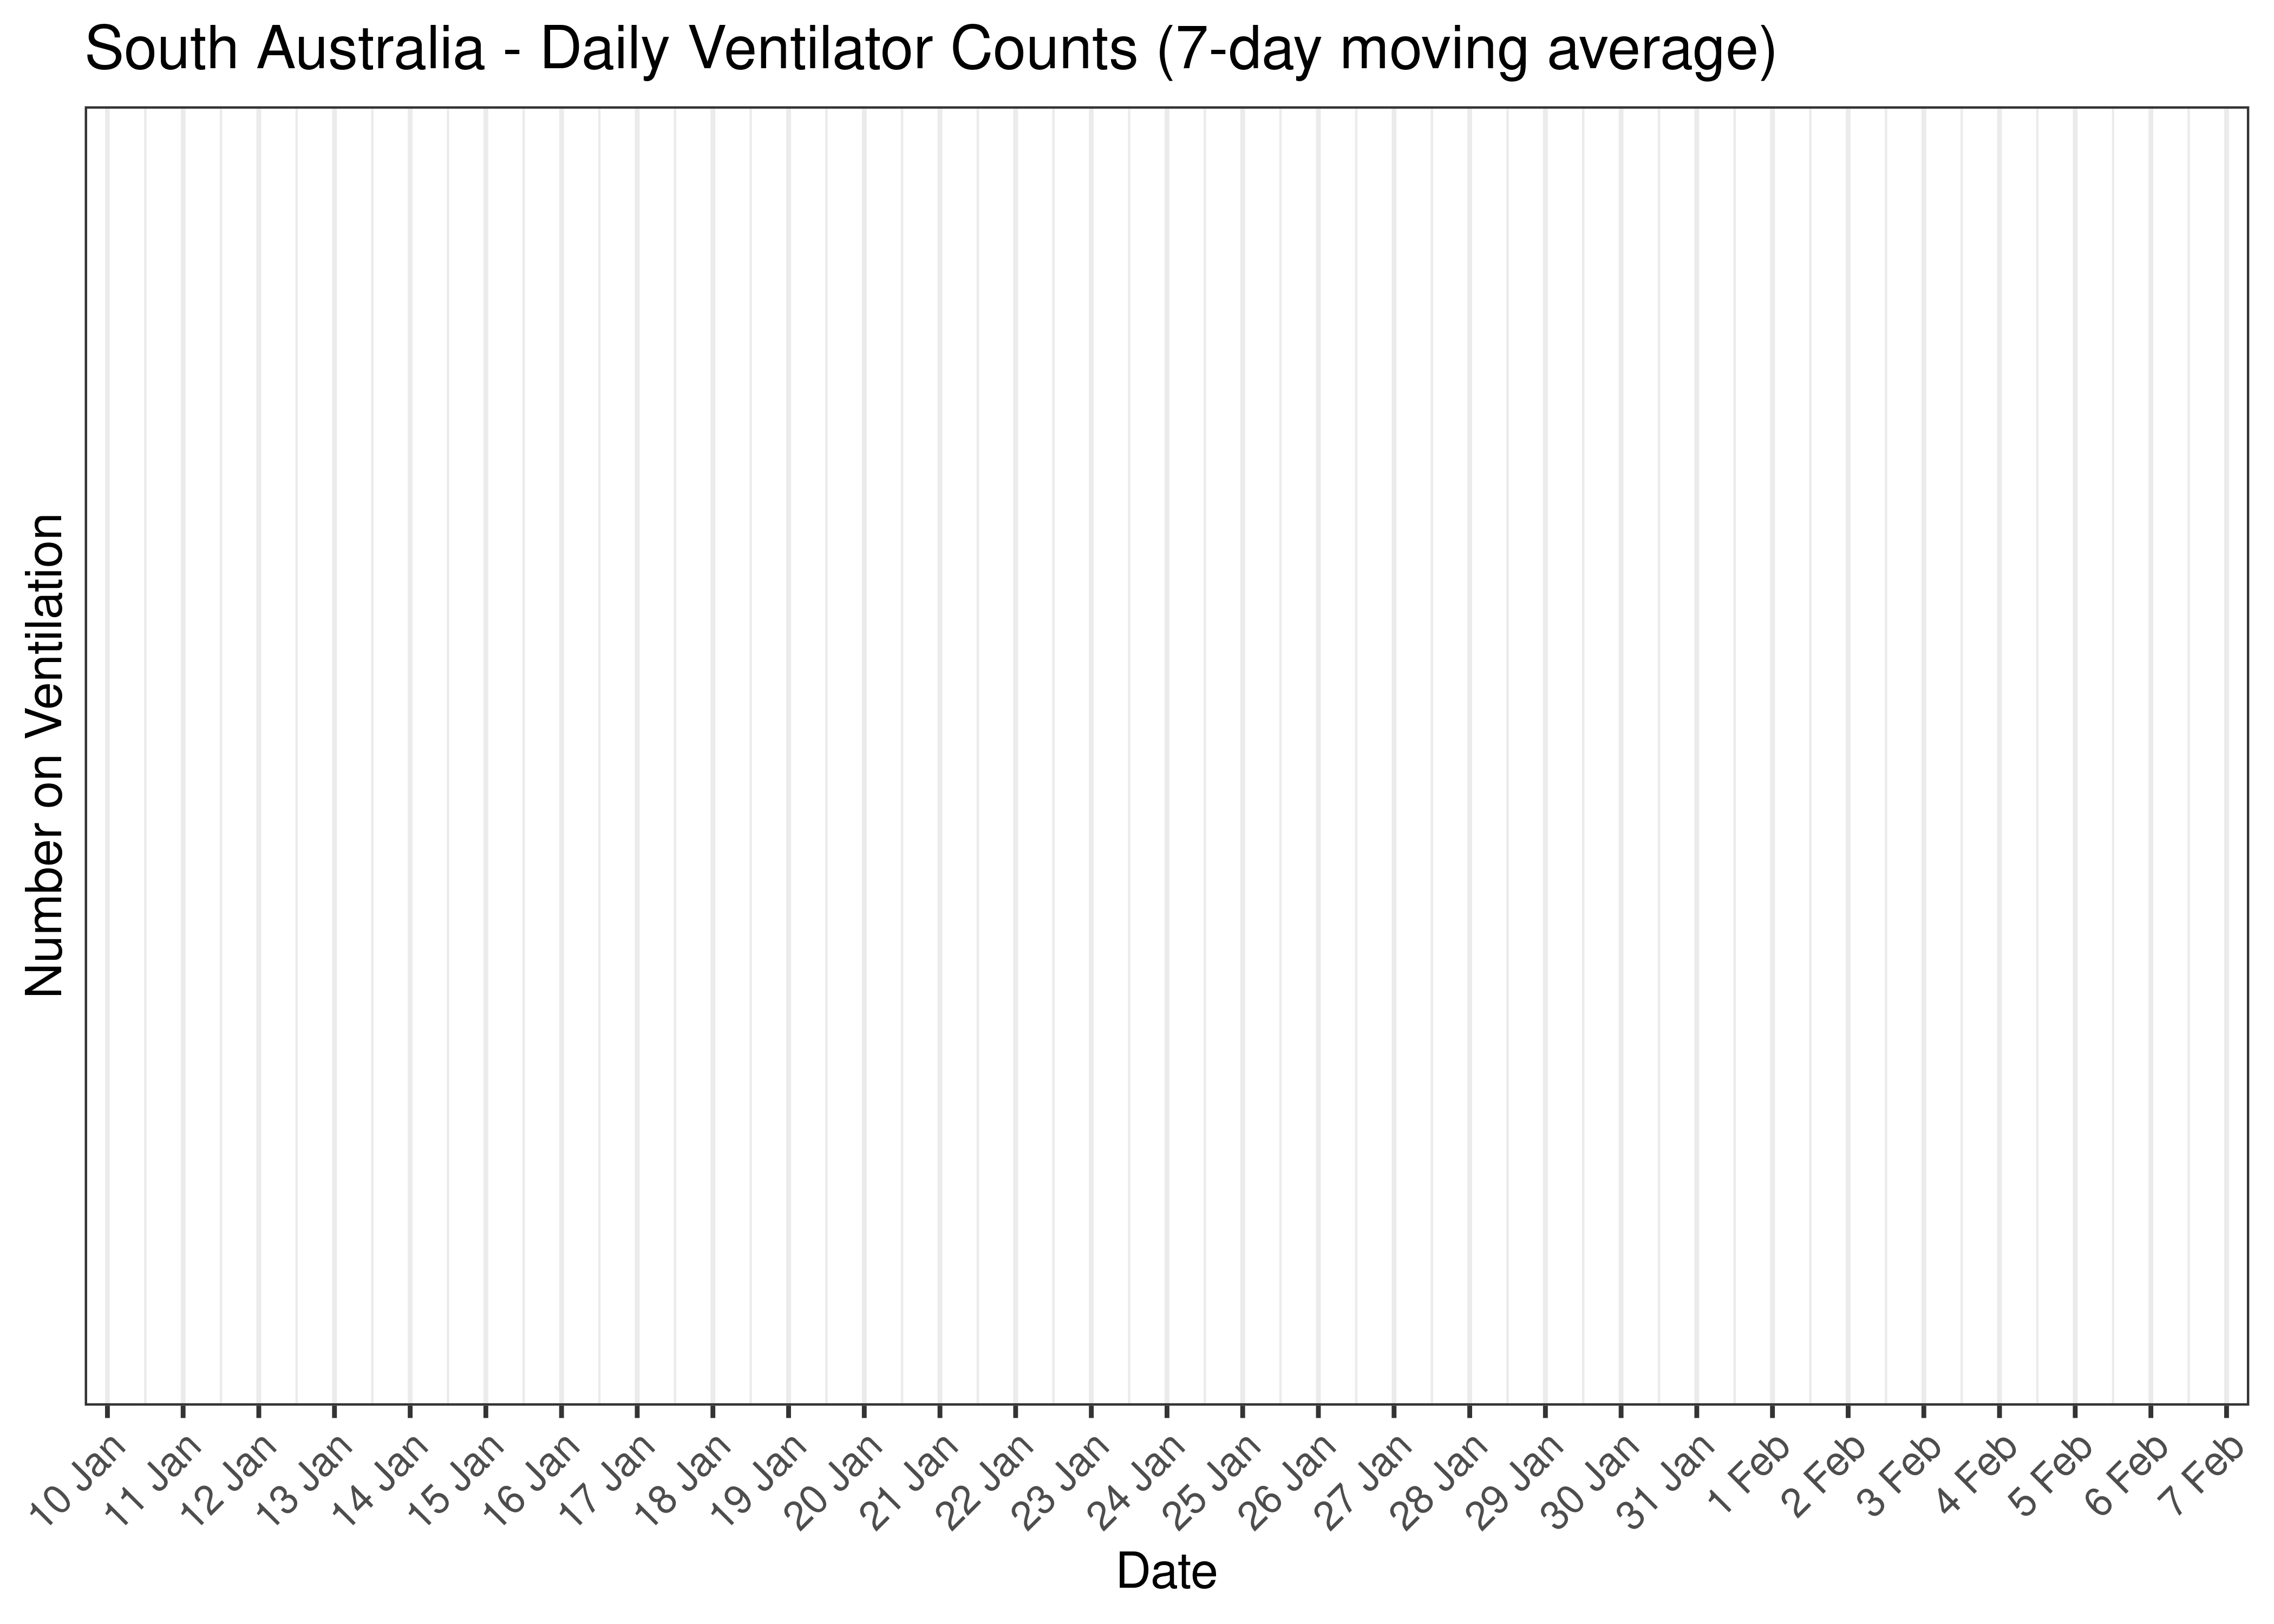 South Australia - Daily Cases (7-day moving average)